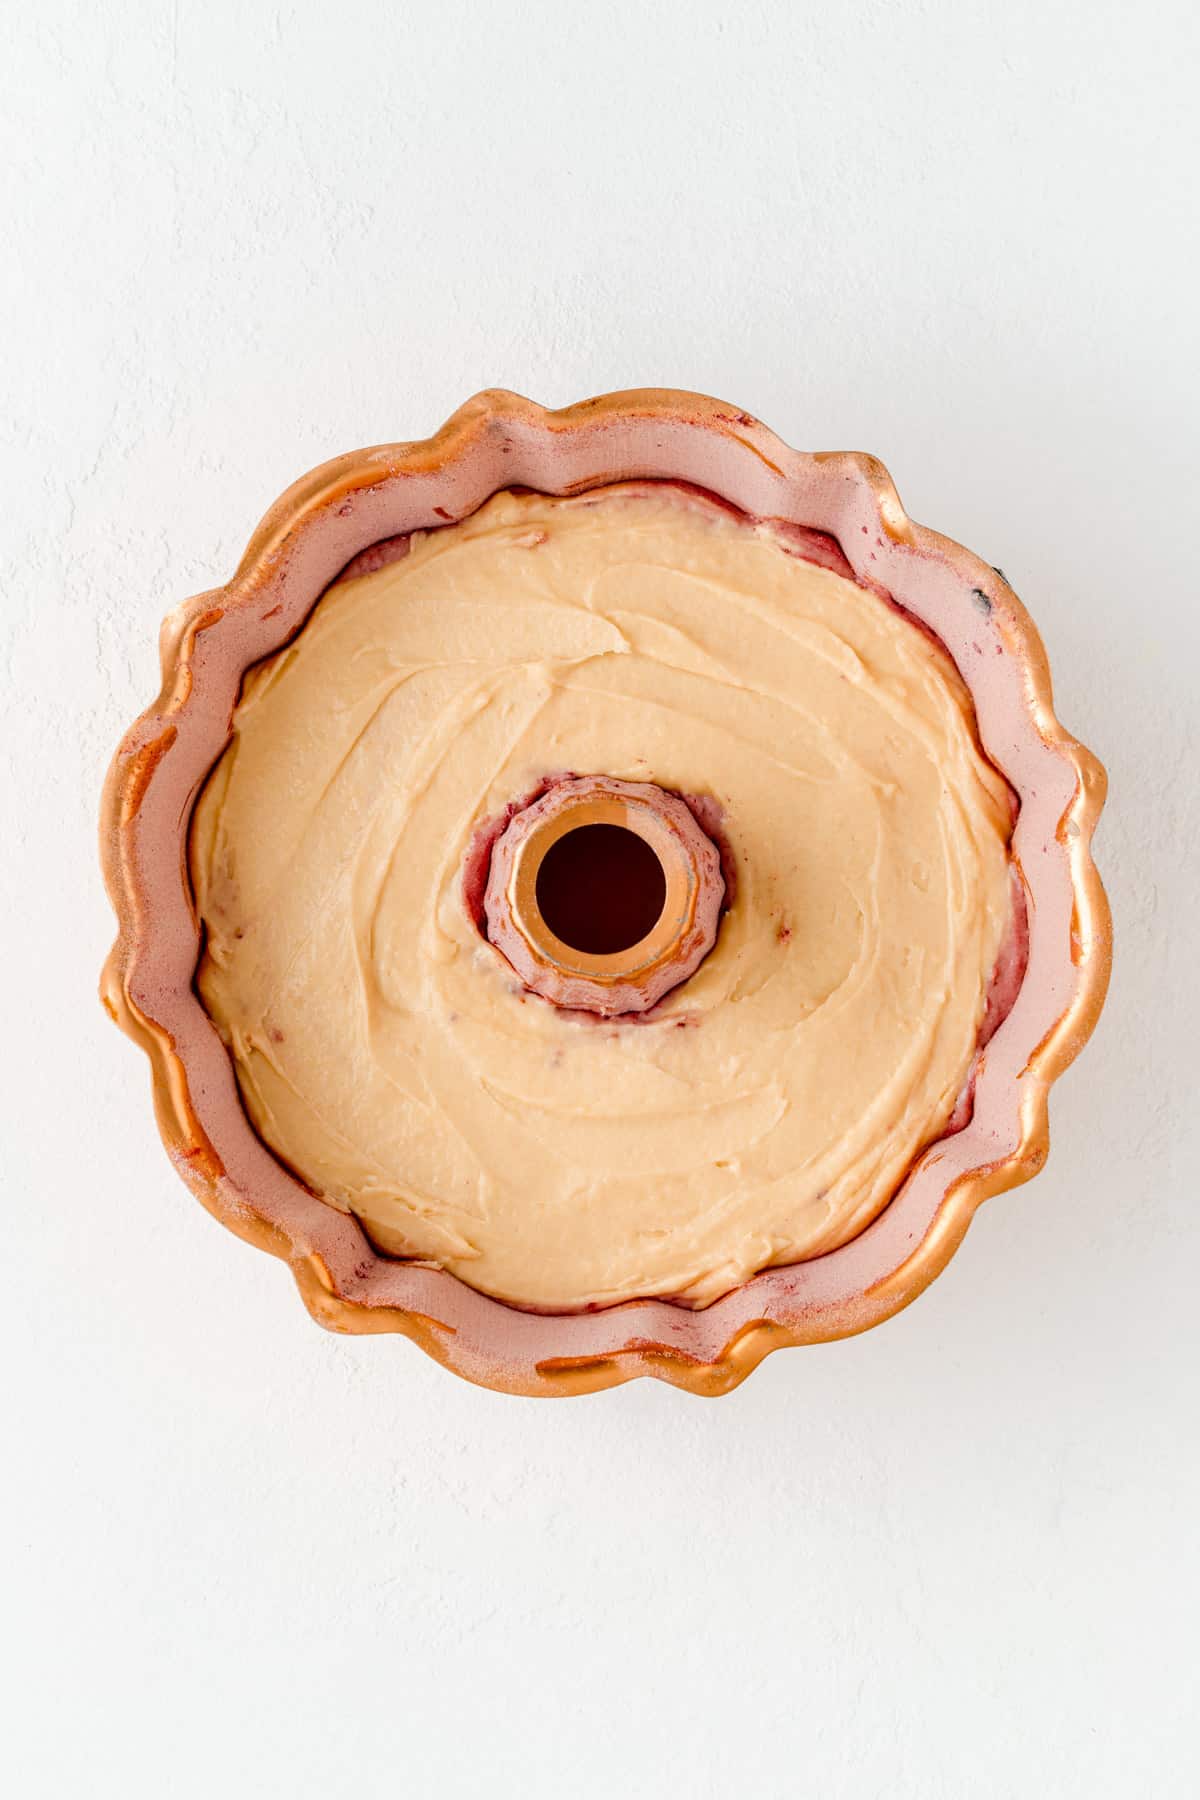 A copper Bundt pan with layered vanilla raspberry and then vanilla smooth batter on top.